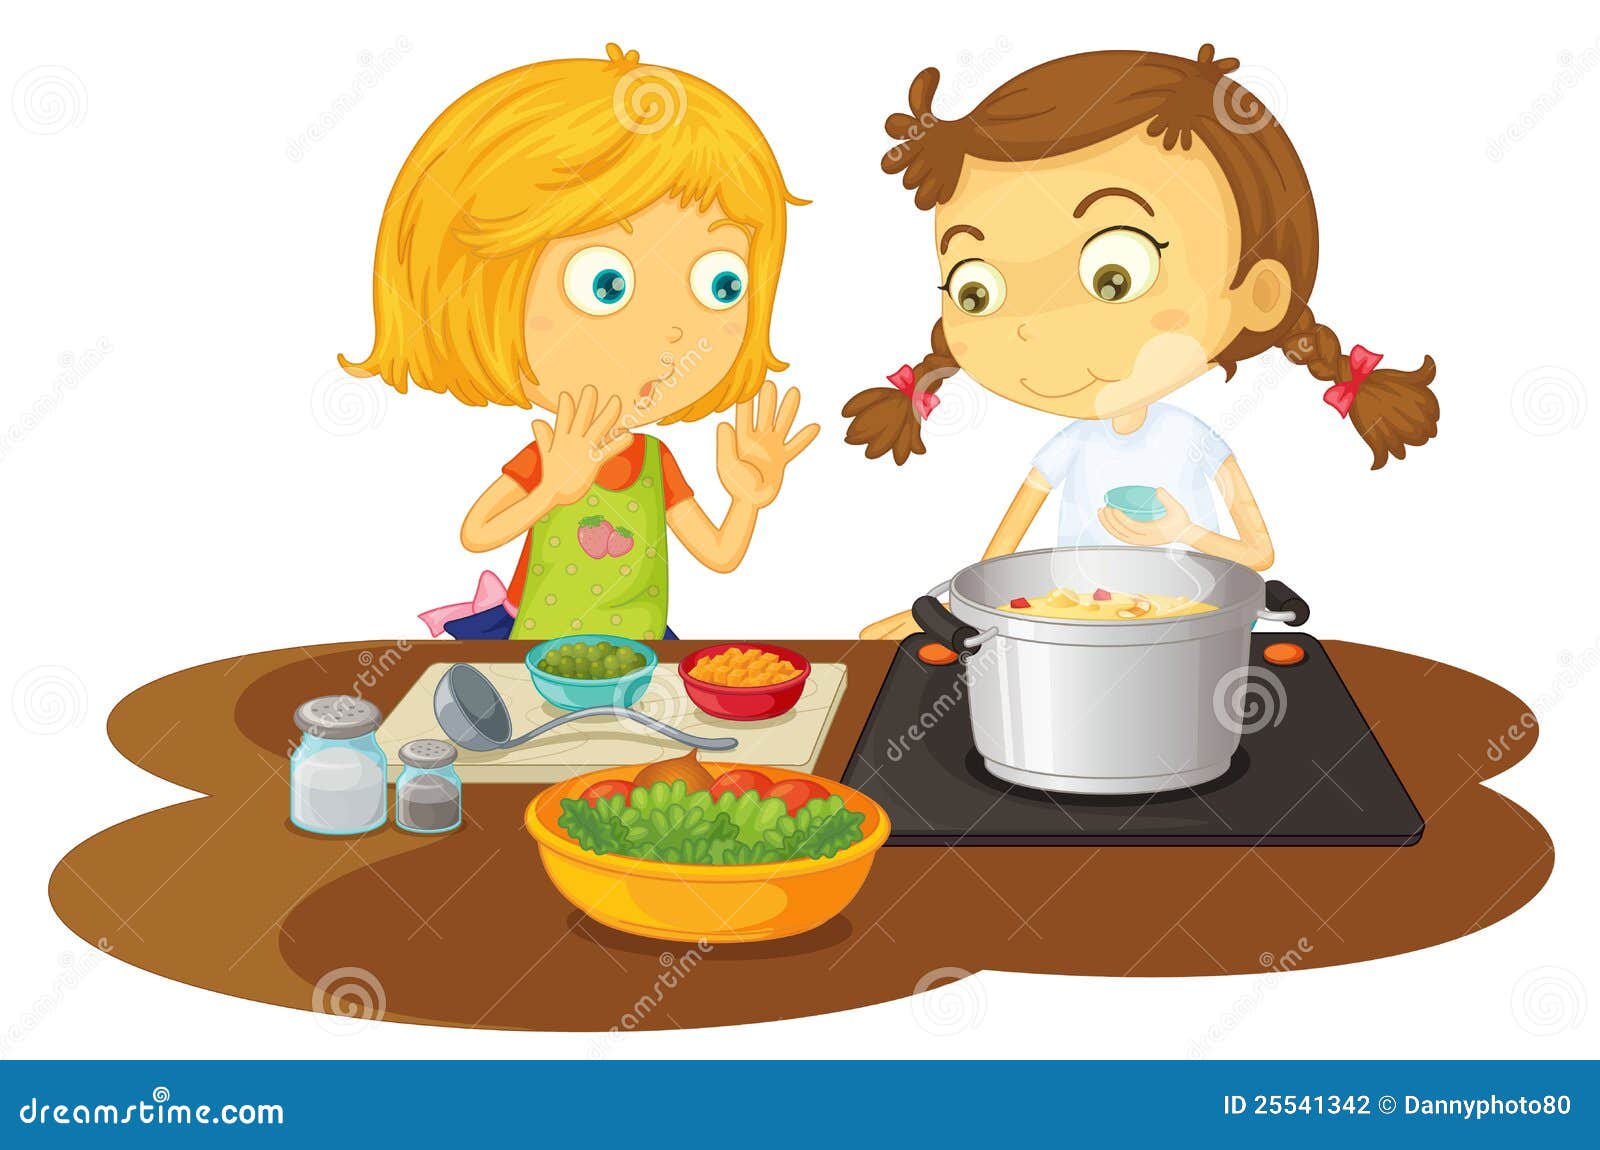 cooking food clip art - photo #42